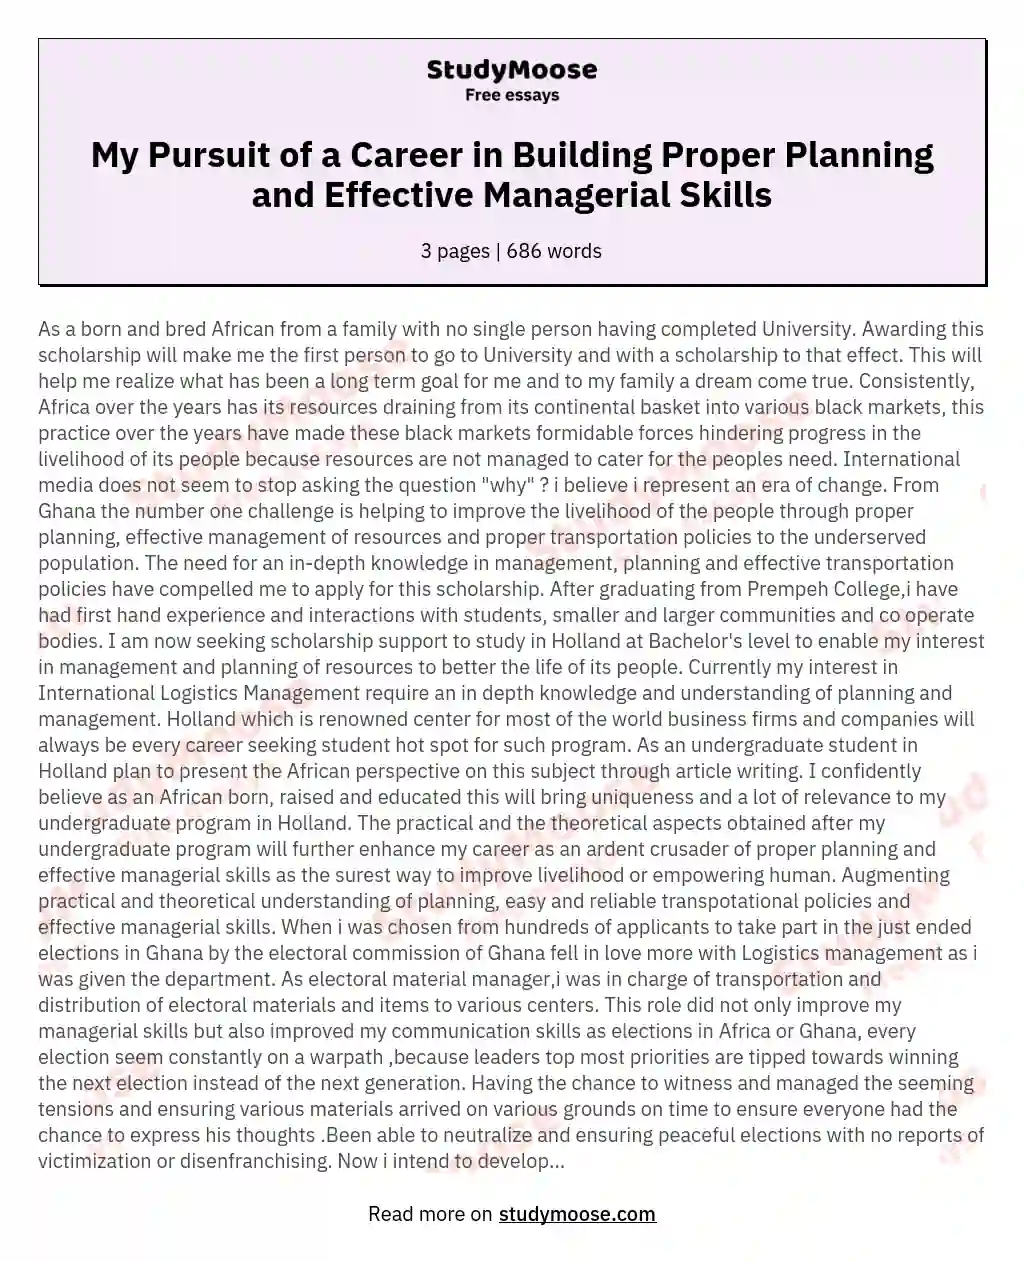 My Pursuit of a Career in Building Proper Planning and Effective Managerial Skills essay